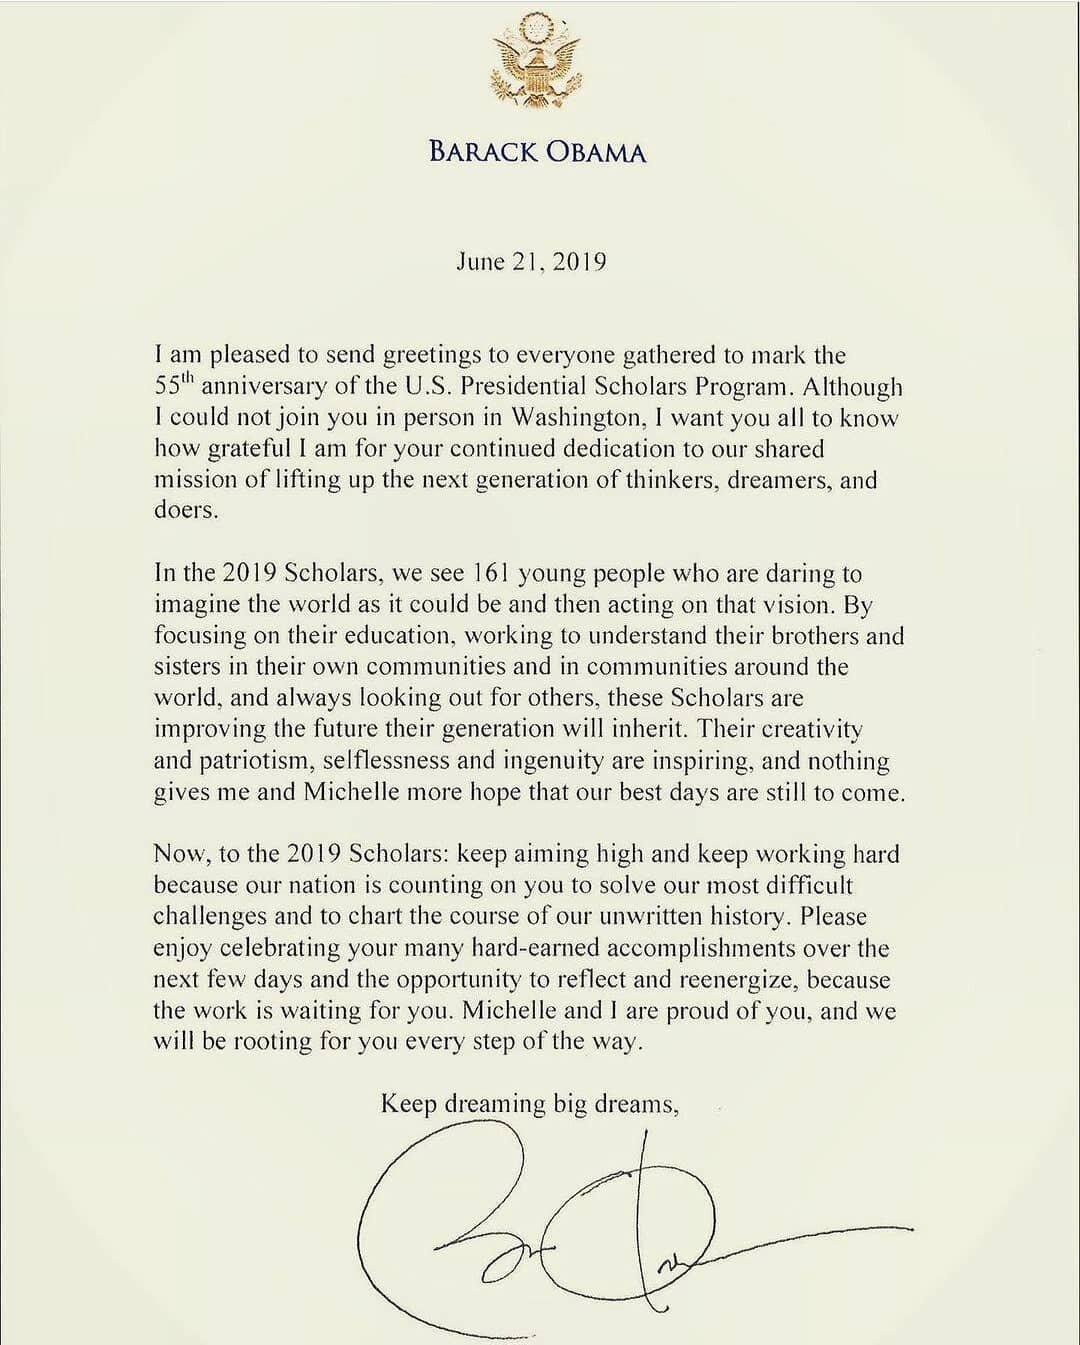 We are joining the #ArchivesHashtagParty to kick off the holiday weekend! From the desk of #POTUS44 @barackobama, this description rings true for every class of Presidential Scholars: 

&quot;161 young people who are daring to imagine the world as it